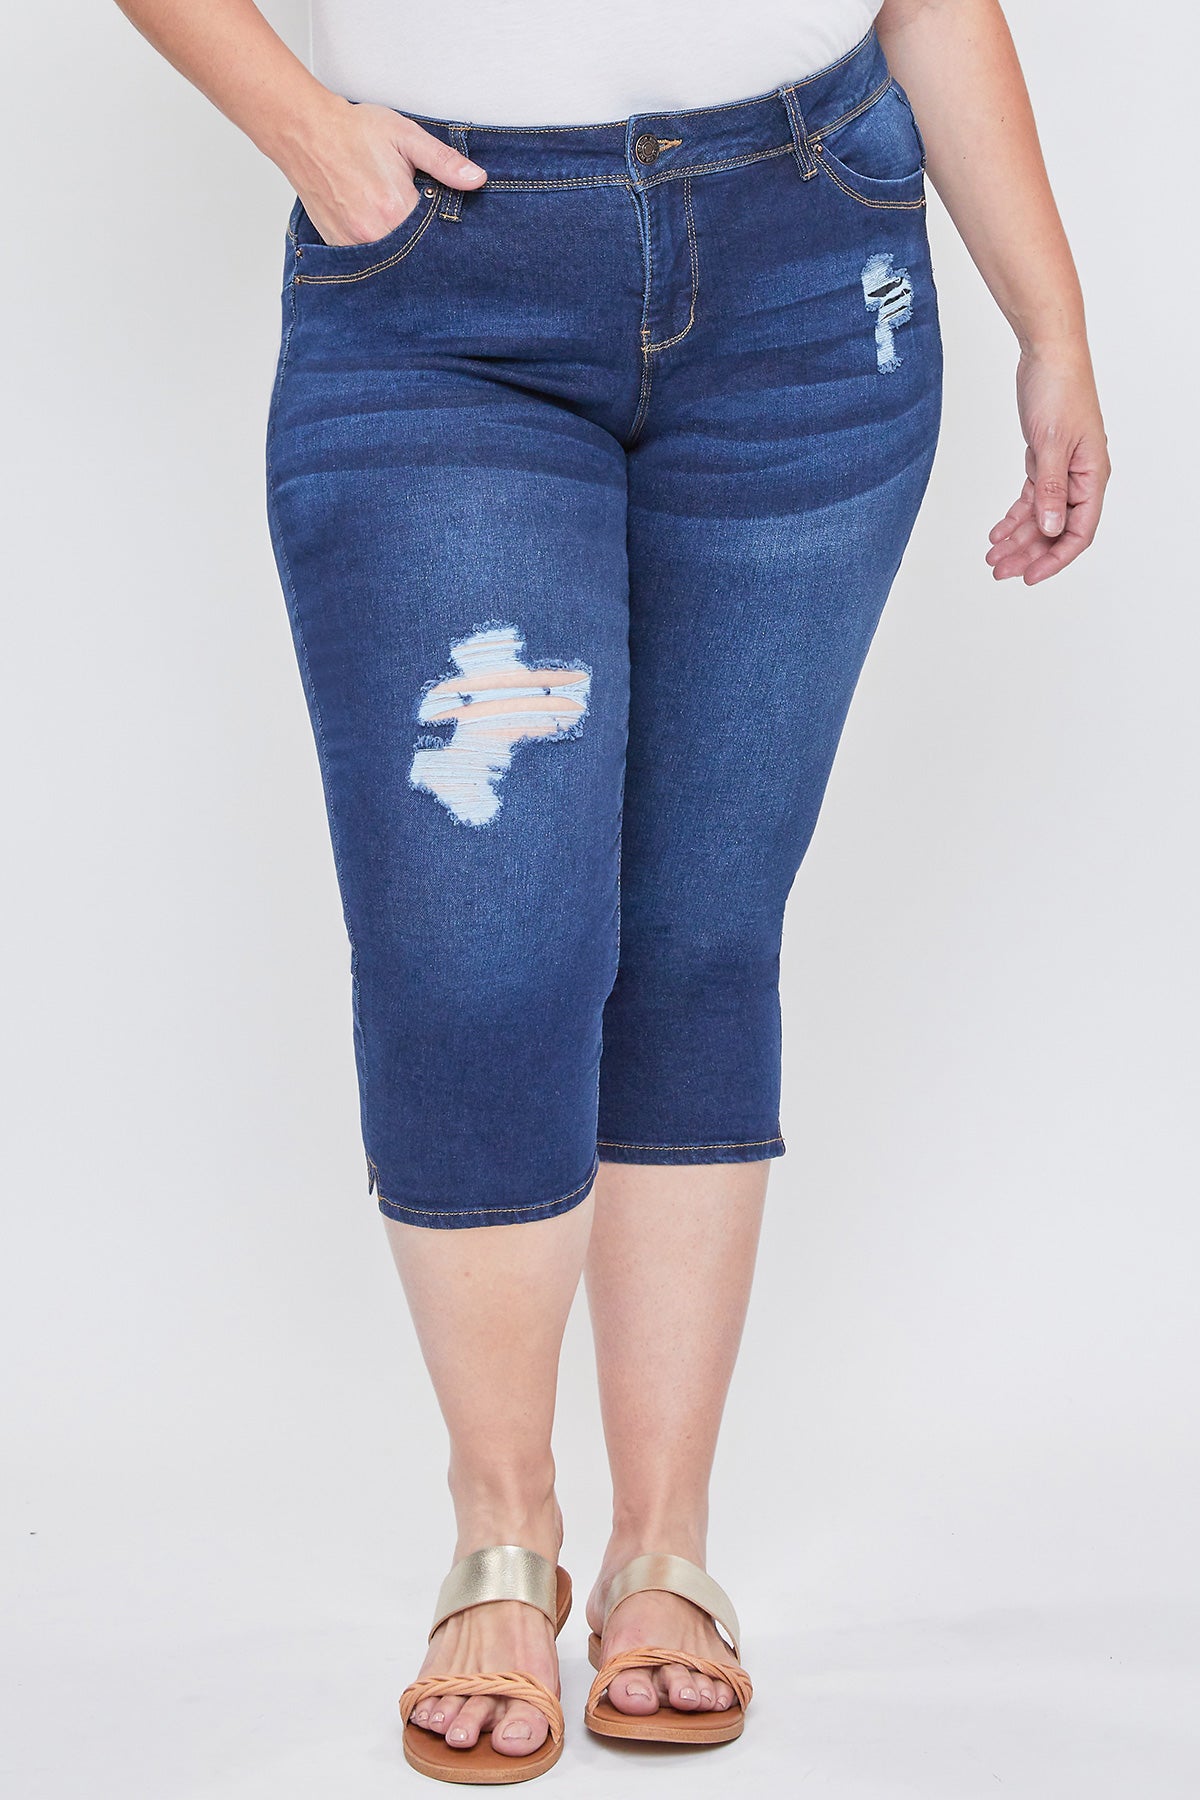 Missy Skinny Jean With Side Seam Insert Made With Recycled Fibers , Pack Of 12 from Royalty for Me